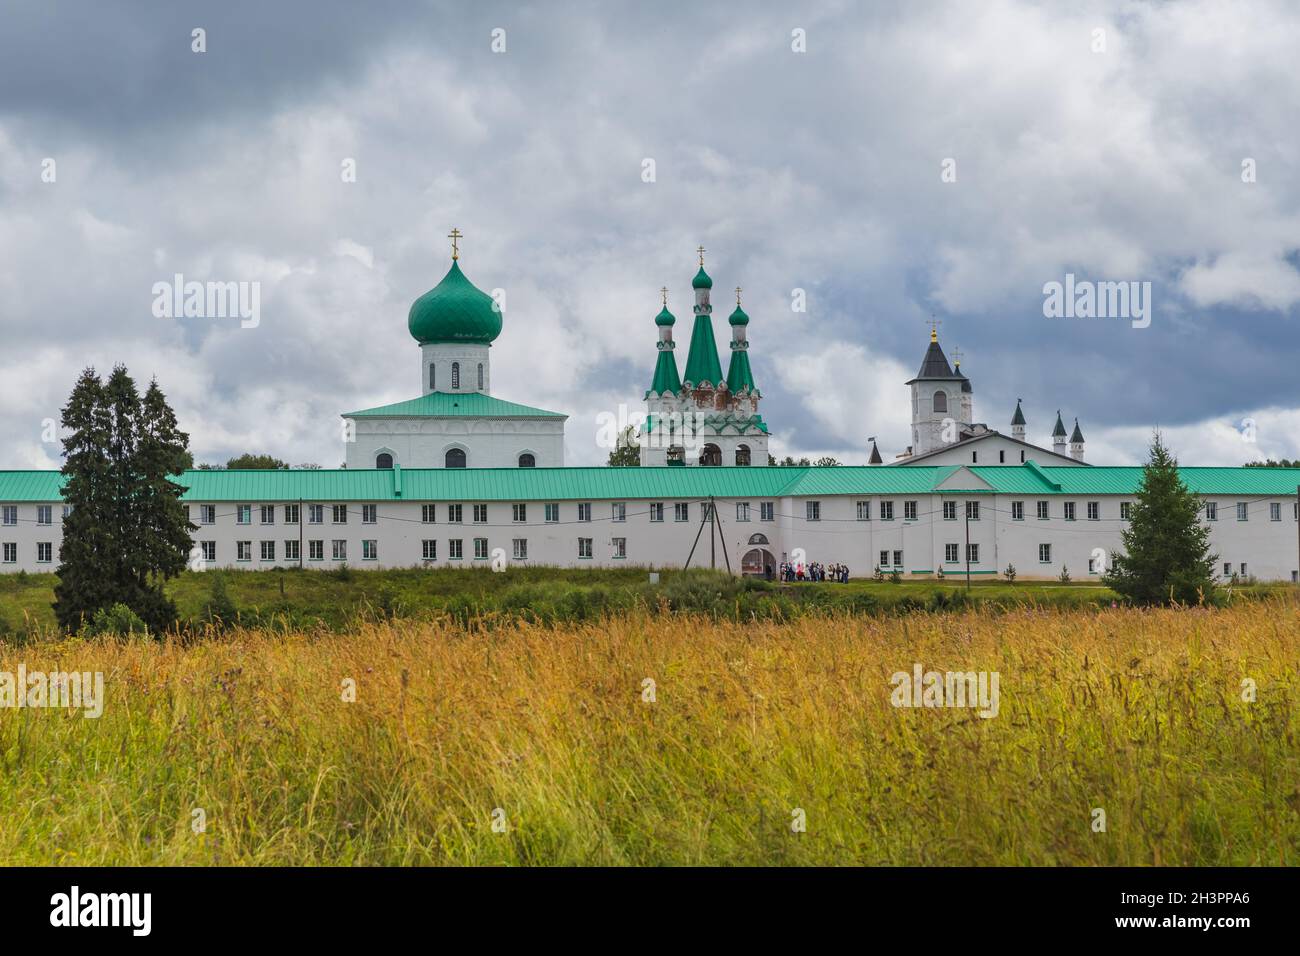 The Svirsky monastery in the village of Old Sloboda - Russia Stock Photo